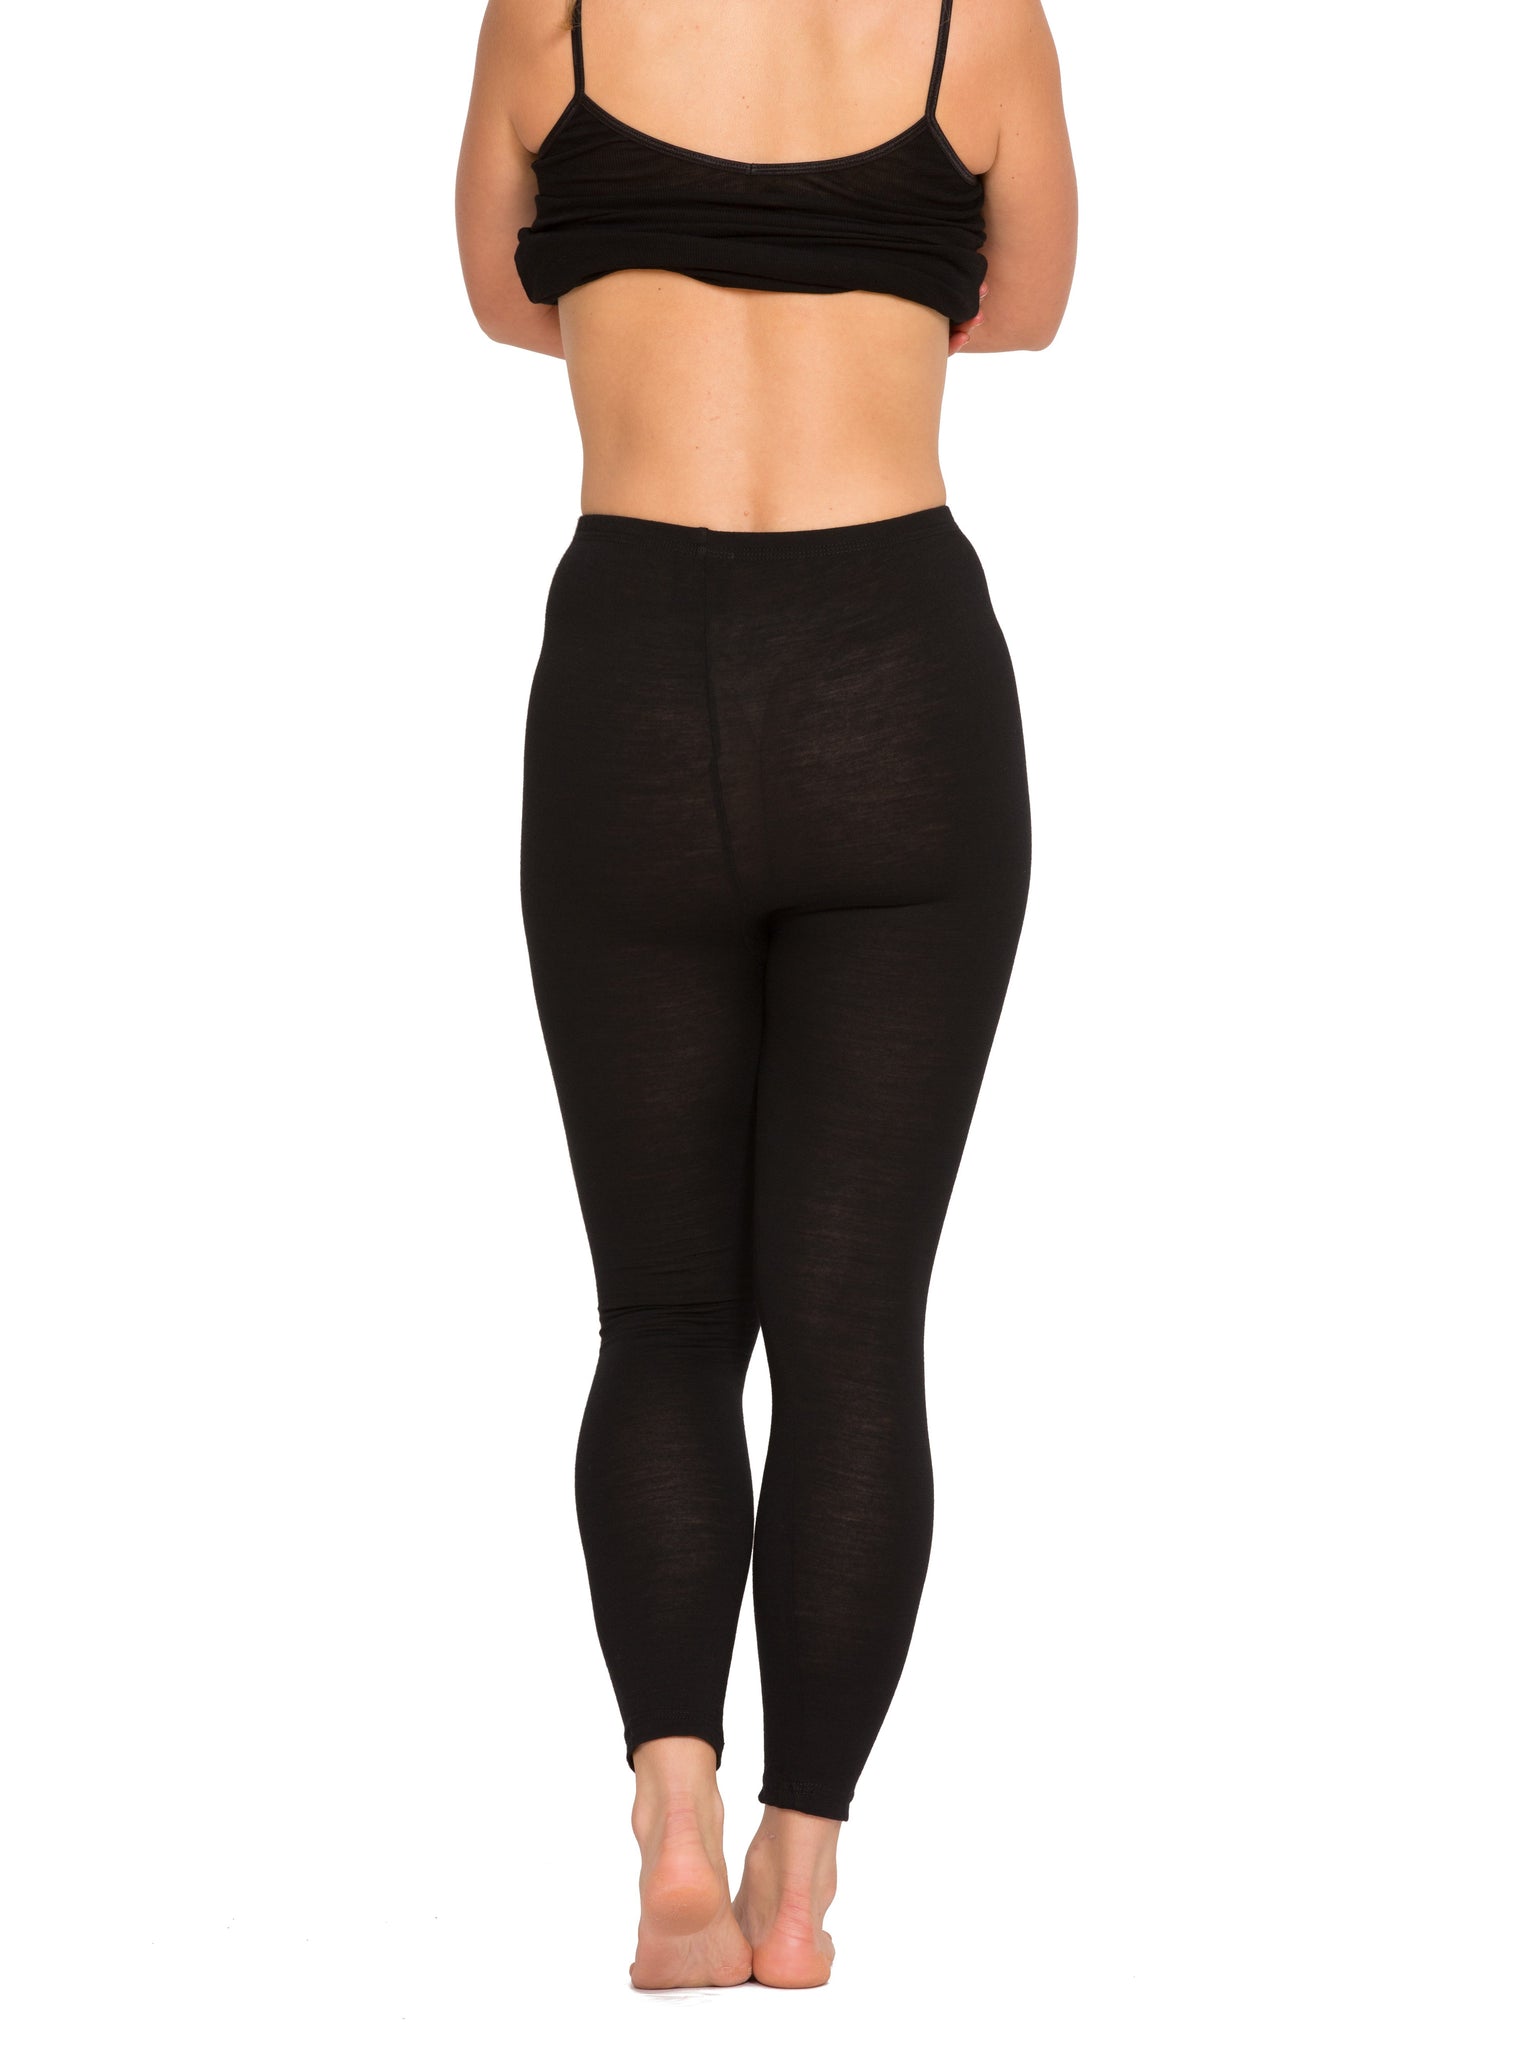 MERINO WOOL Blend Women's Thermal Underwear Base Layer Leggings Bottoms.  Perfect for Winter Layering and Sports. Thermal Underwear. 